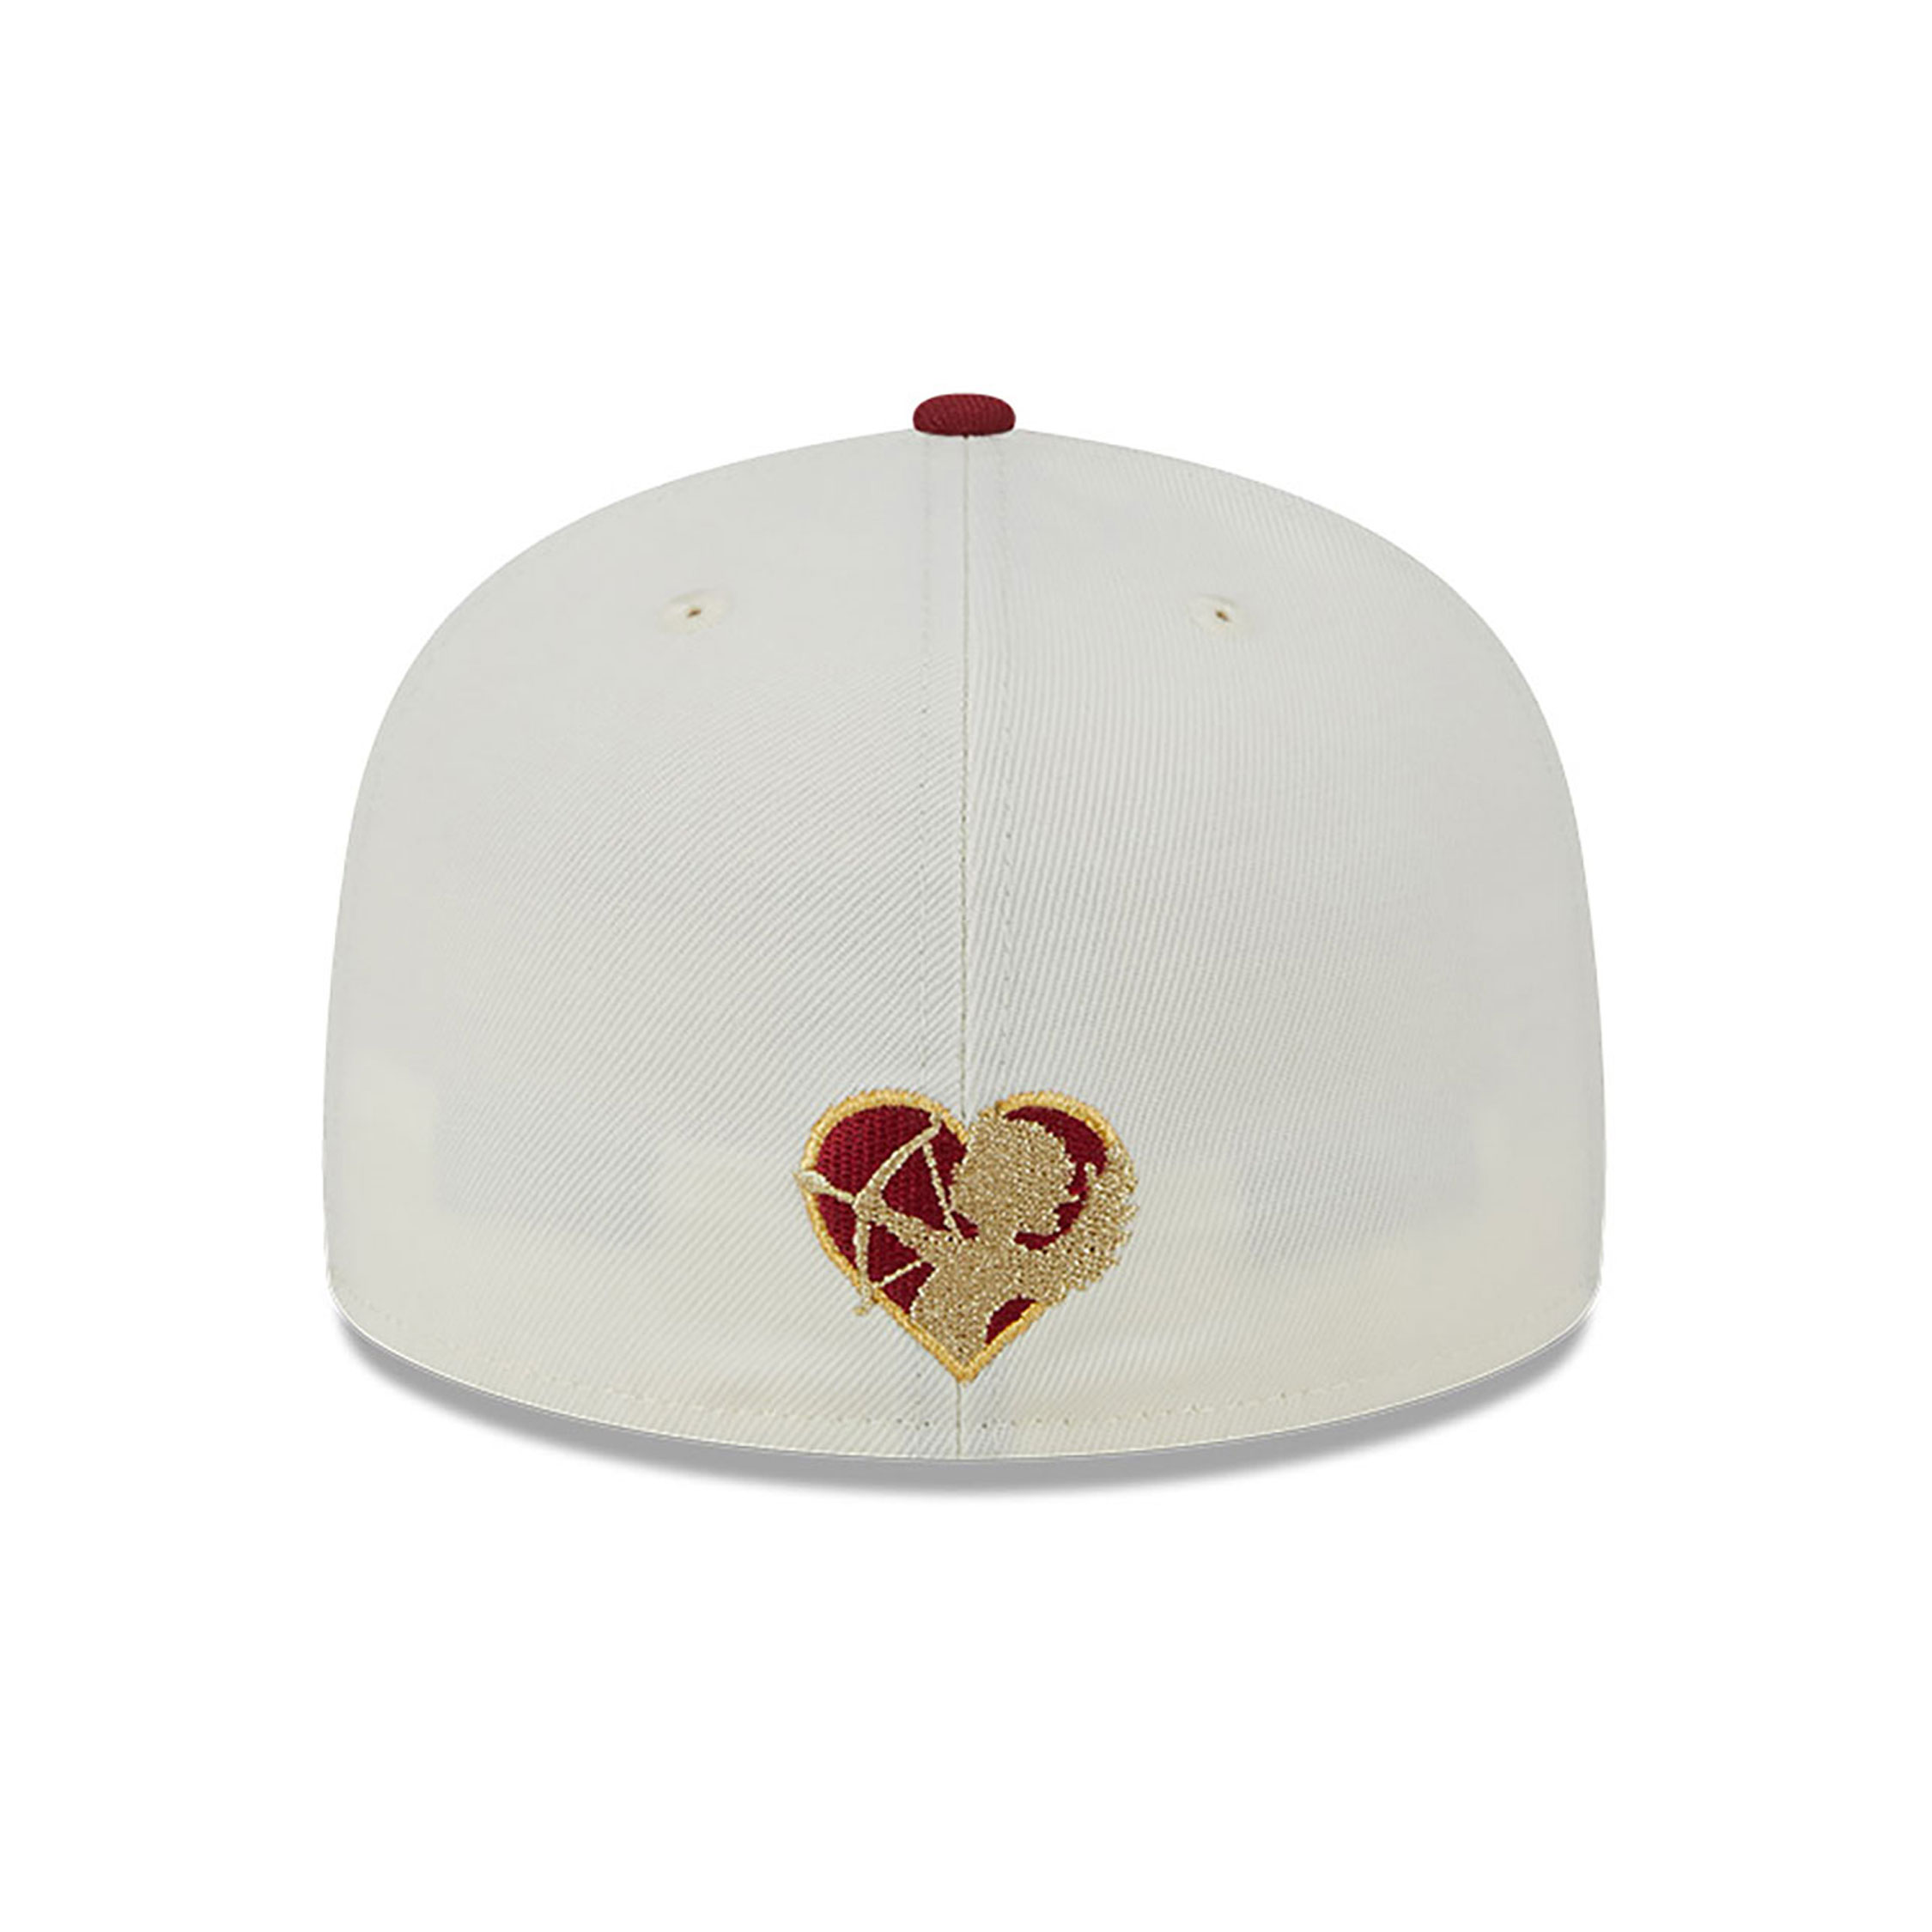 Chicago White Sox Be Mine White 59FIFTY Fitted Cap